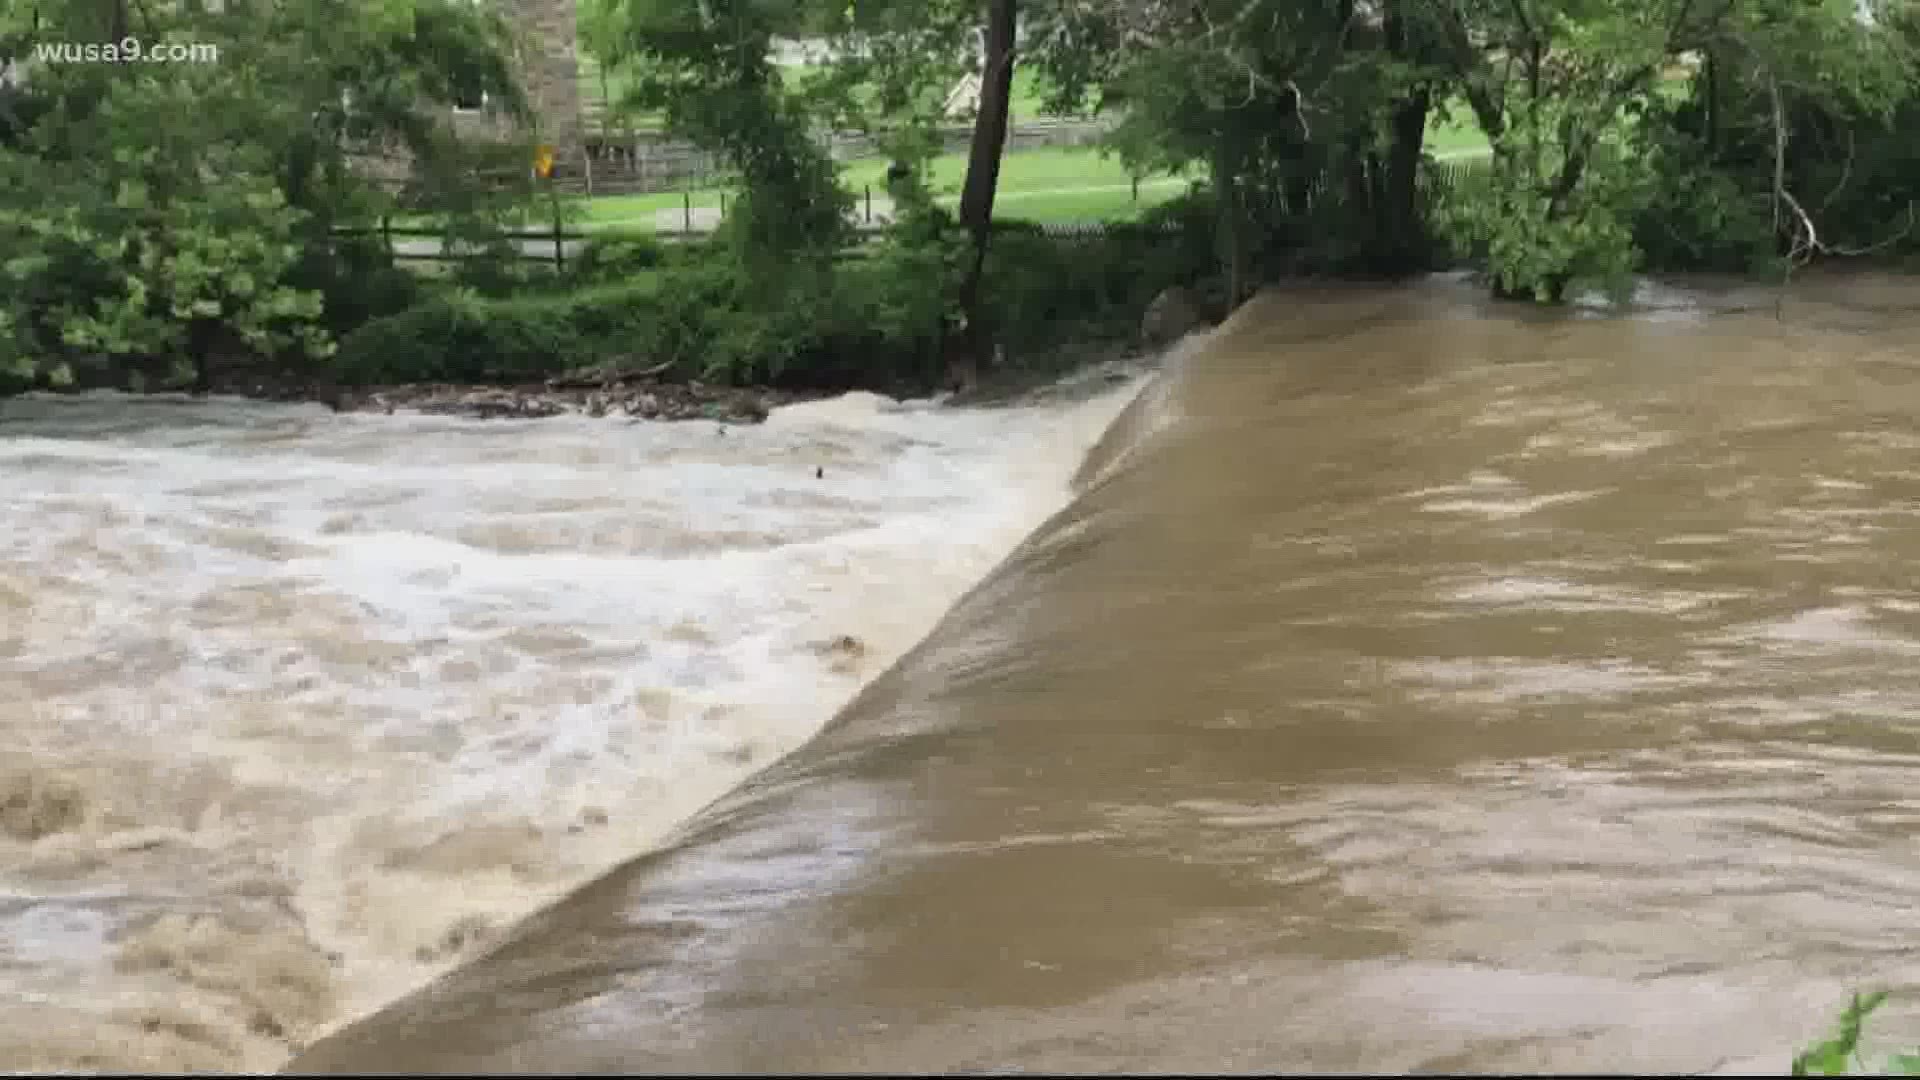 Rock Creek isn't as clear as it normally is. Officials say there is more bacteria, like fecal matter, in the water that can make people sick